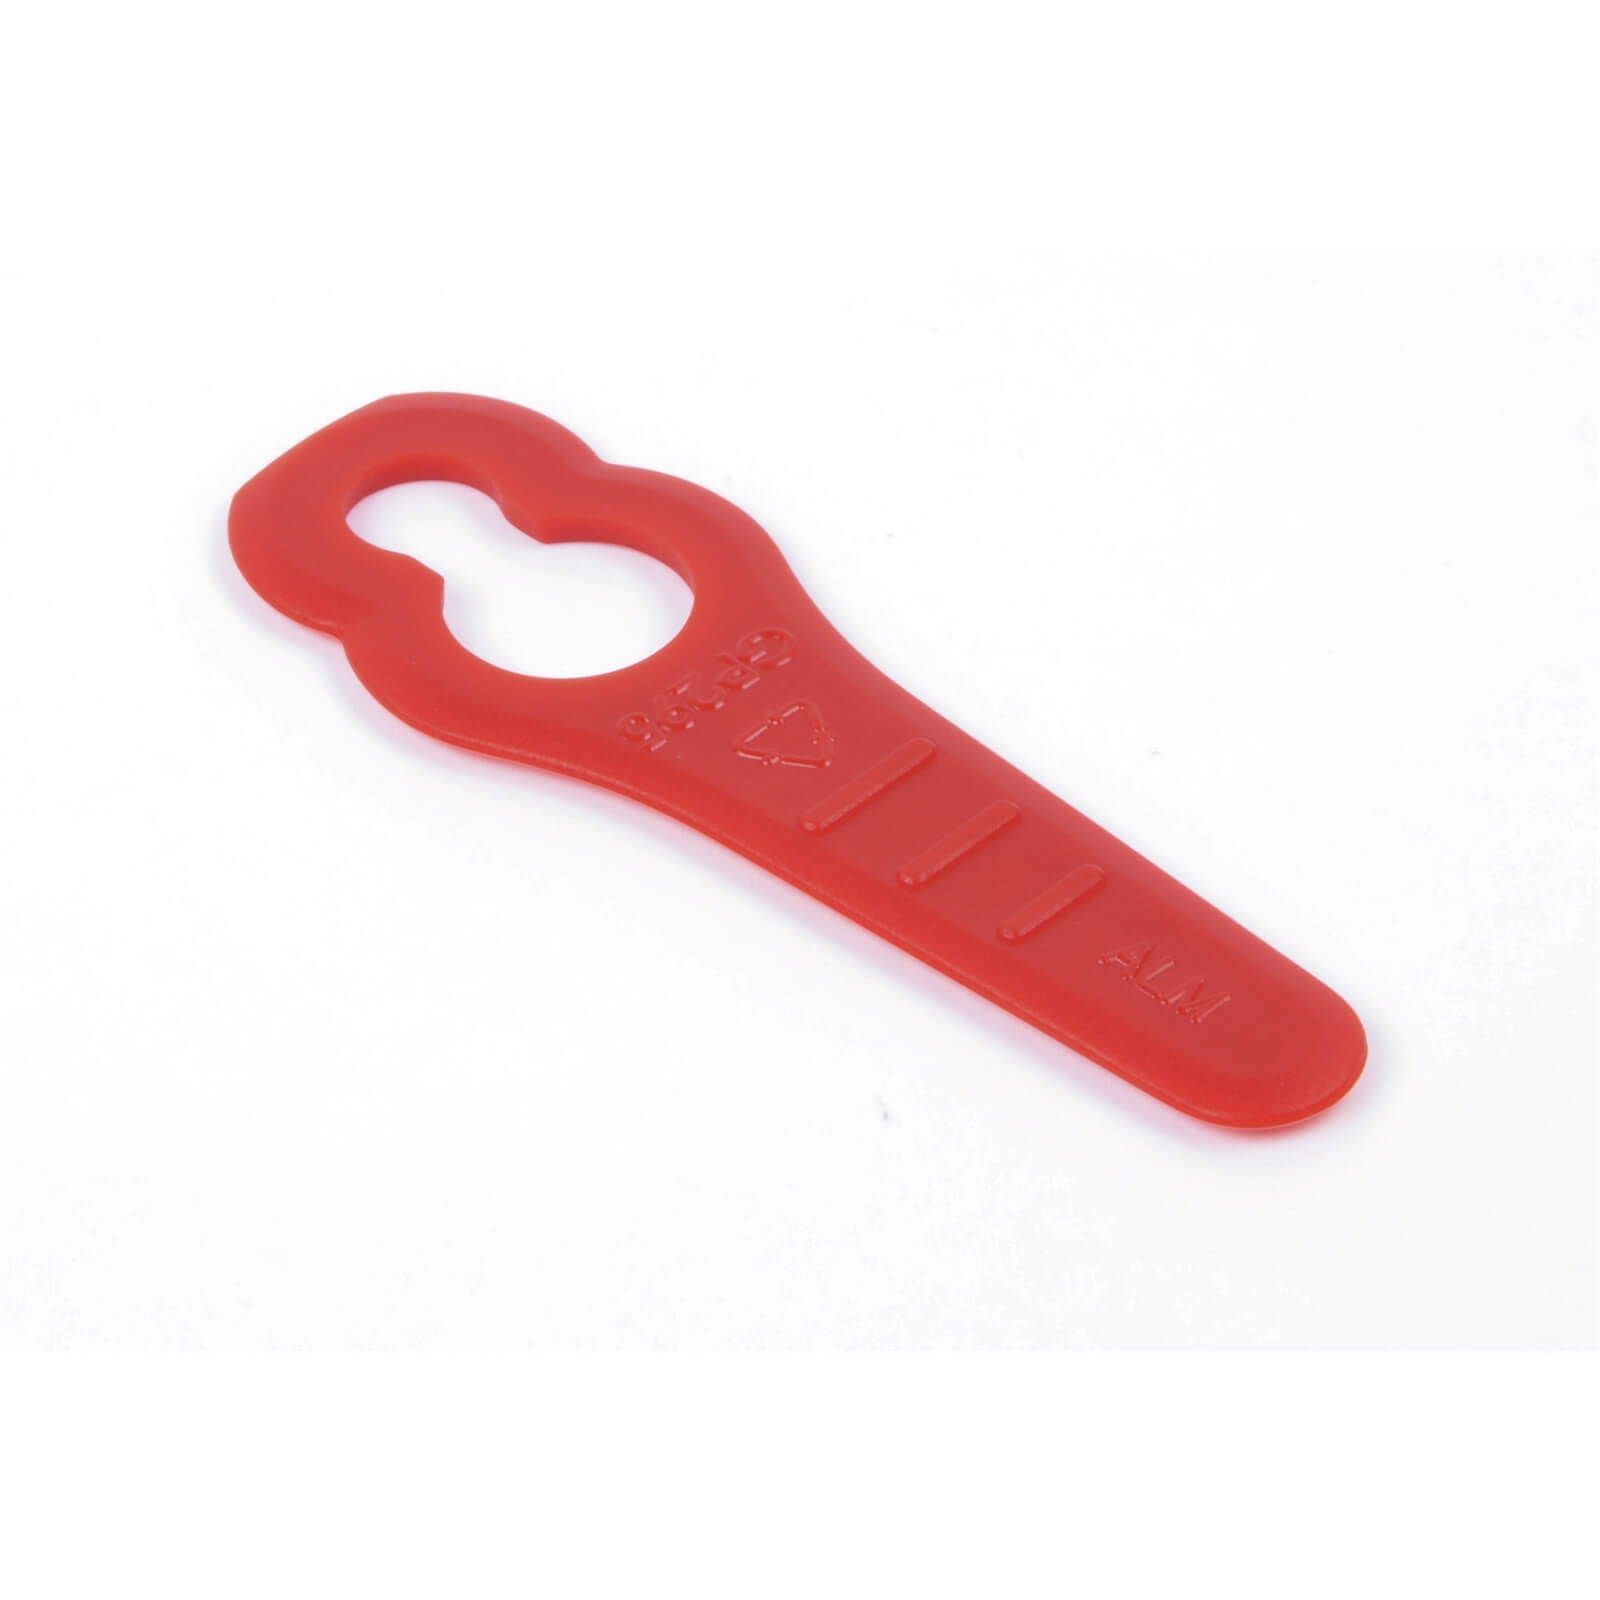 ALM Plastic Lawnmower Blades for Sovereign Hover Plastic